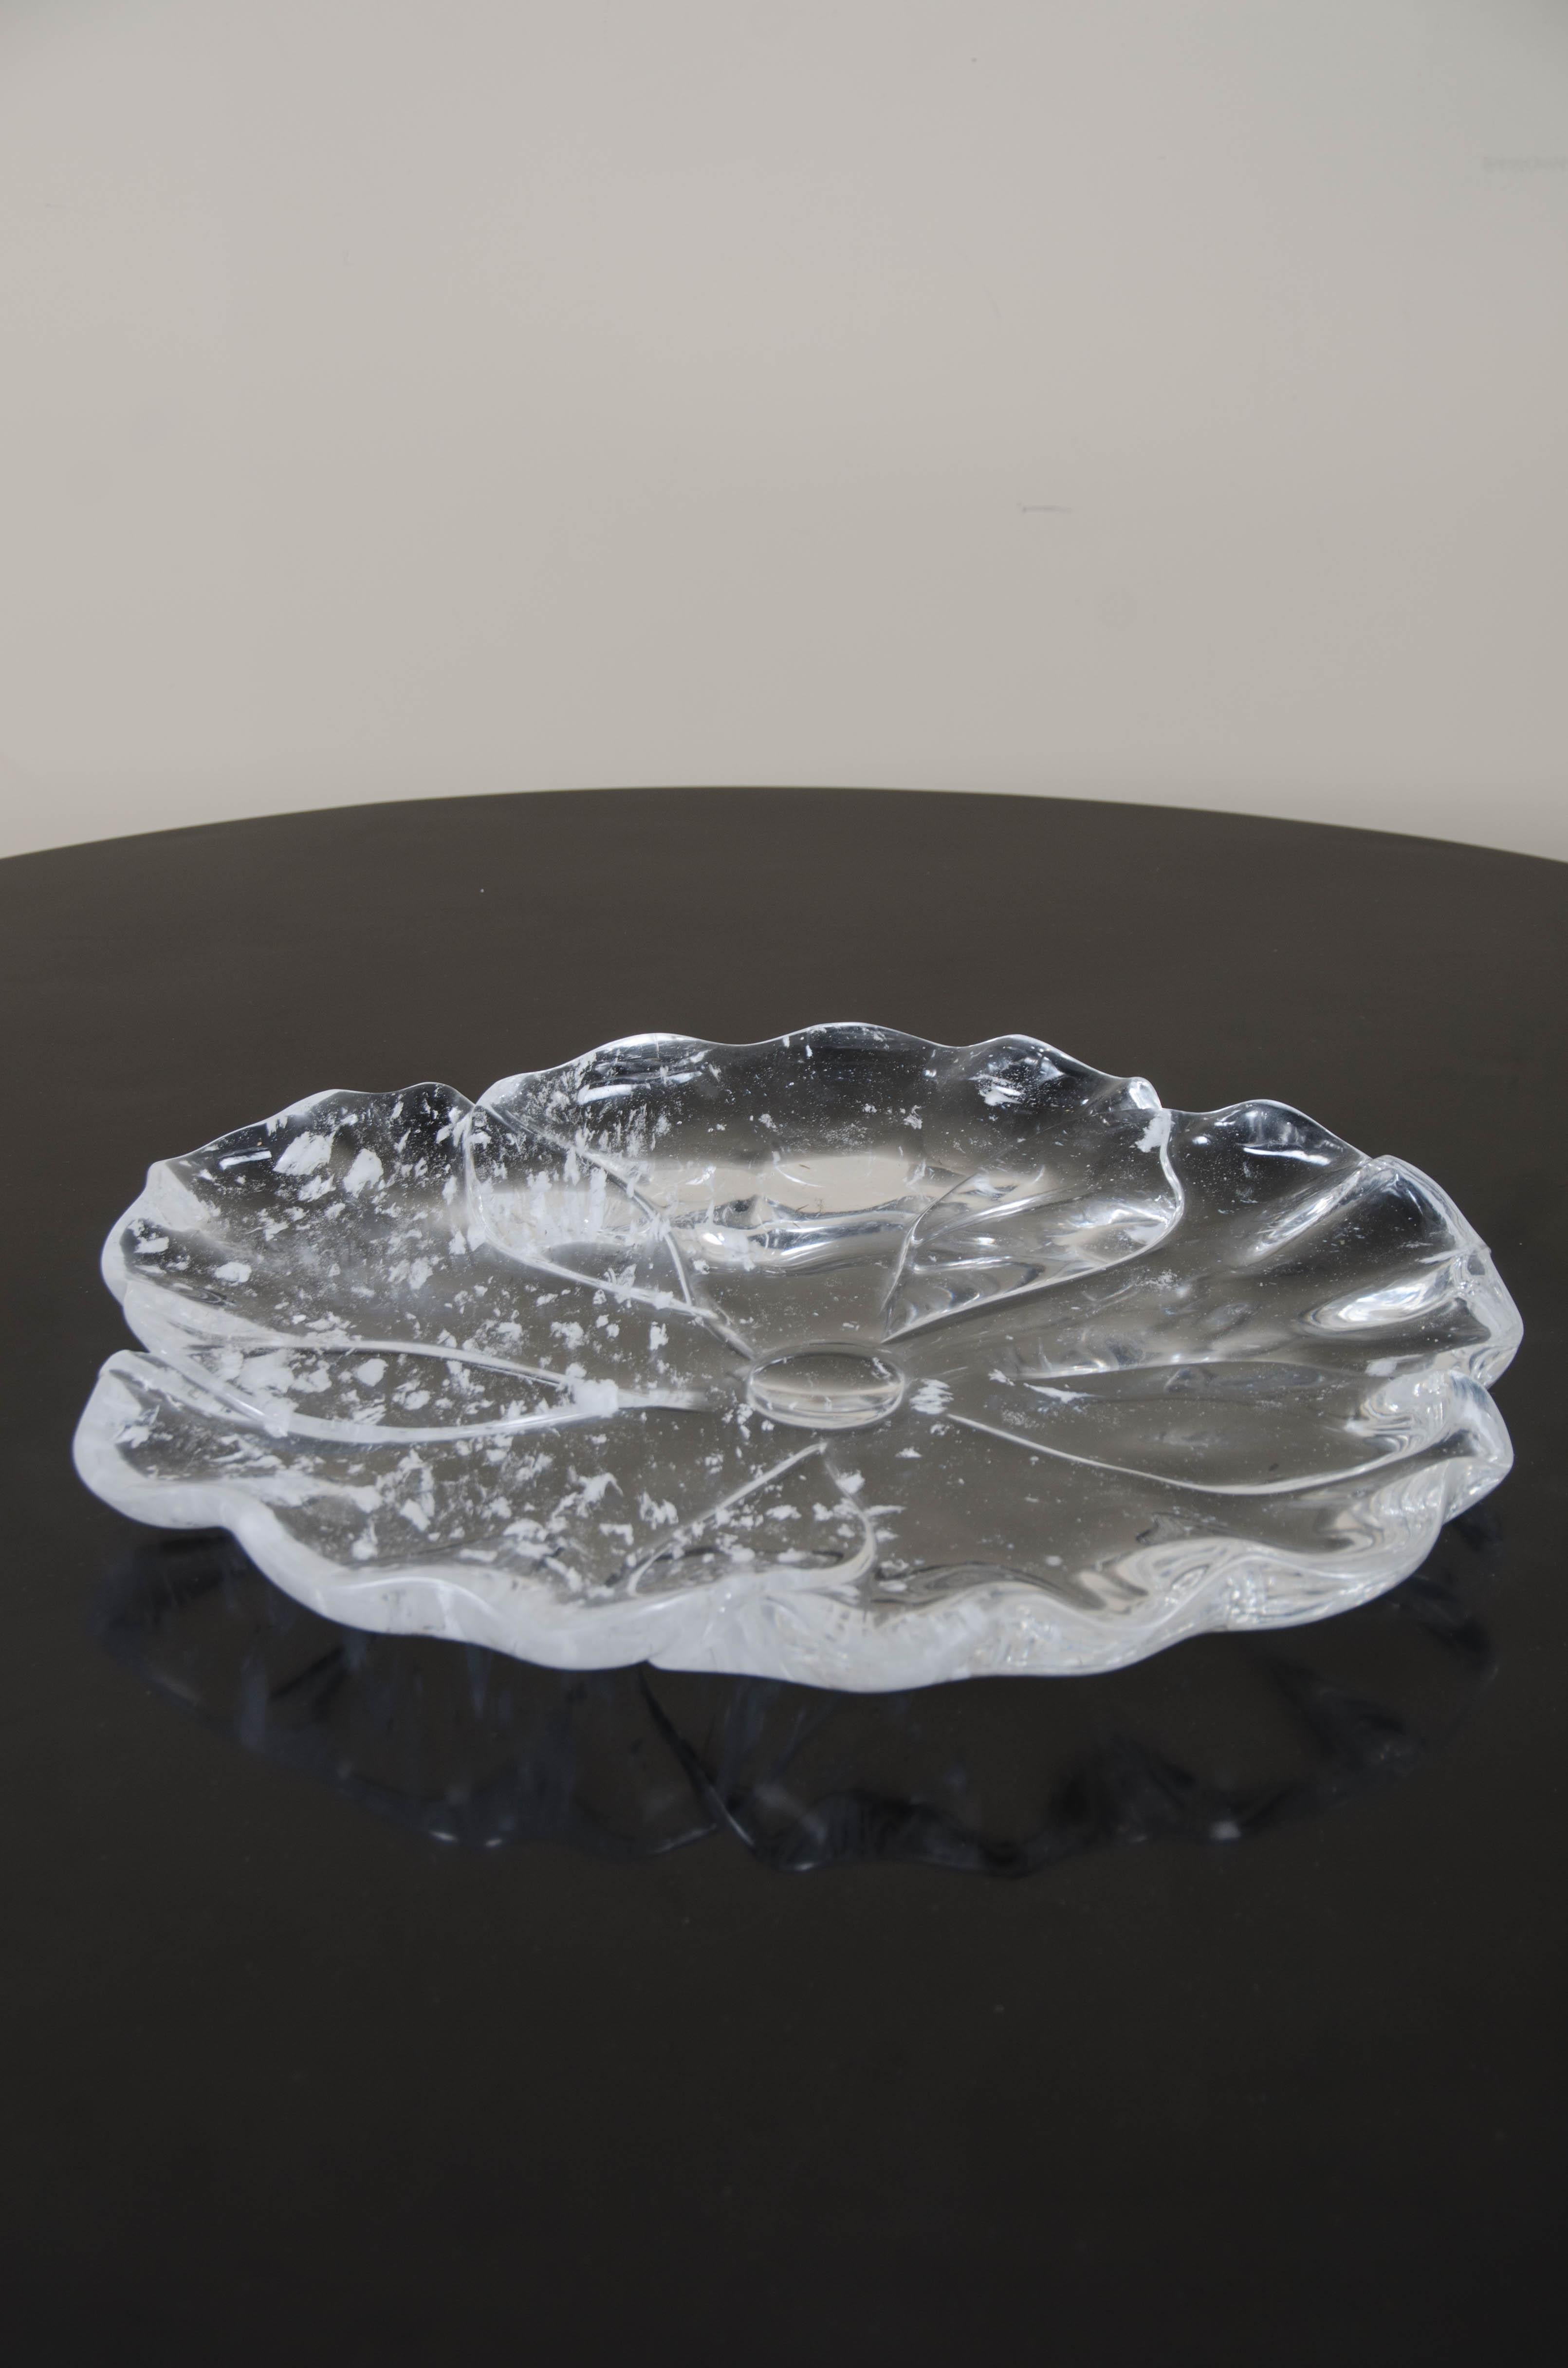 Flower plate
Crystal
Hand carved
Contemporary
Limited Edition
Each individual crystal vary in shapes and inclusions. 

